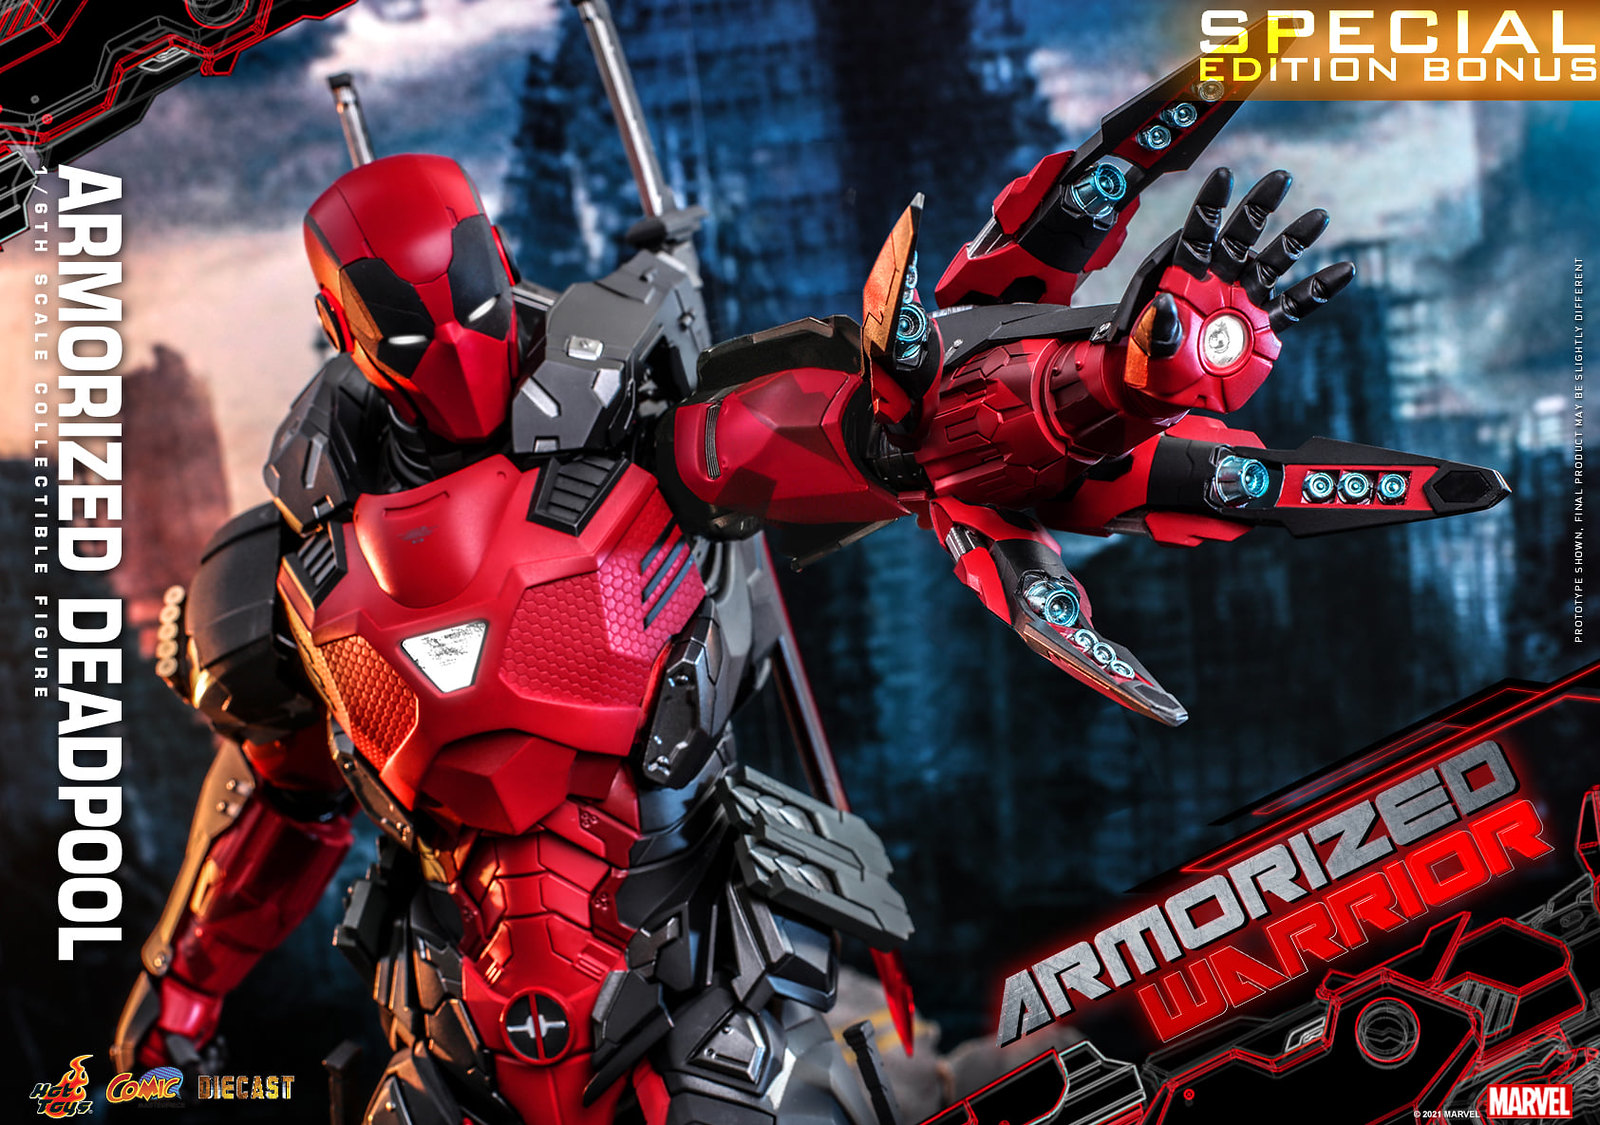 NEW PRODUCT: Hot Toys Armorized Warrior - 1/6th scale Armorized Deadpool Collectible Figure [Armorized Warrior Collection] 51310496087_5b5ef1dd7a_h